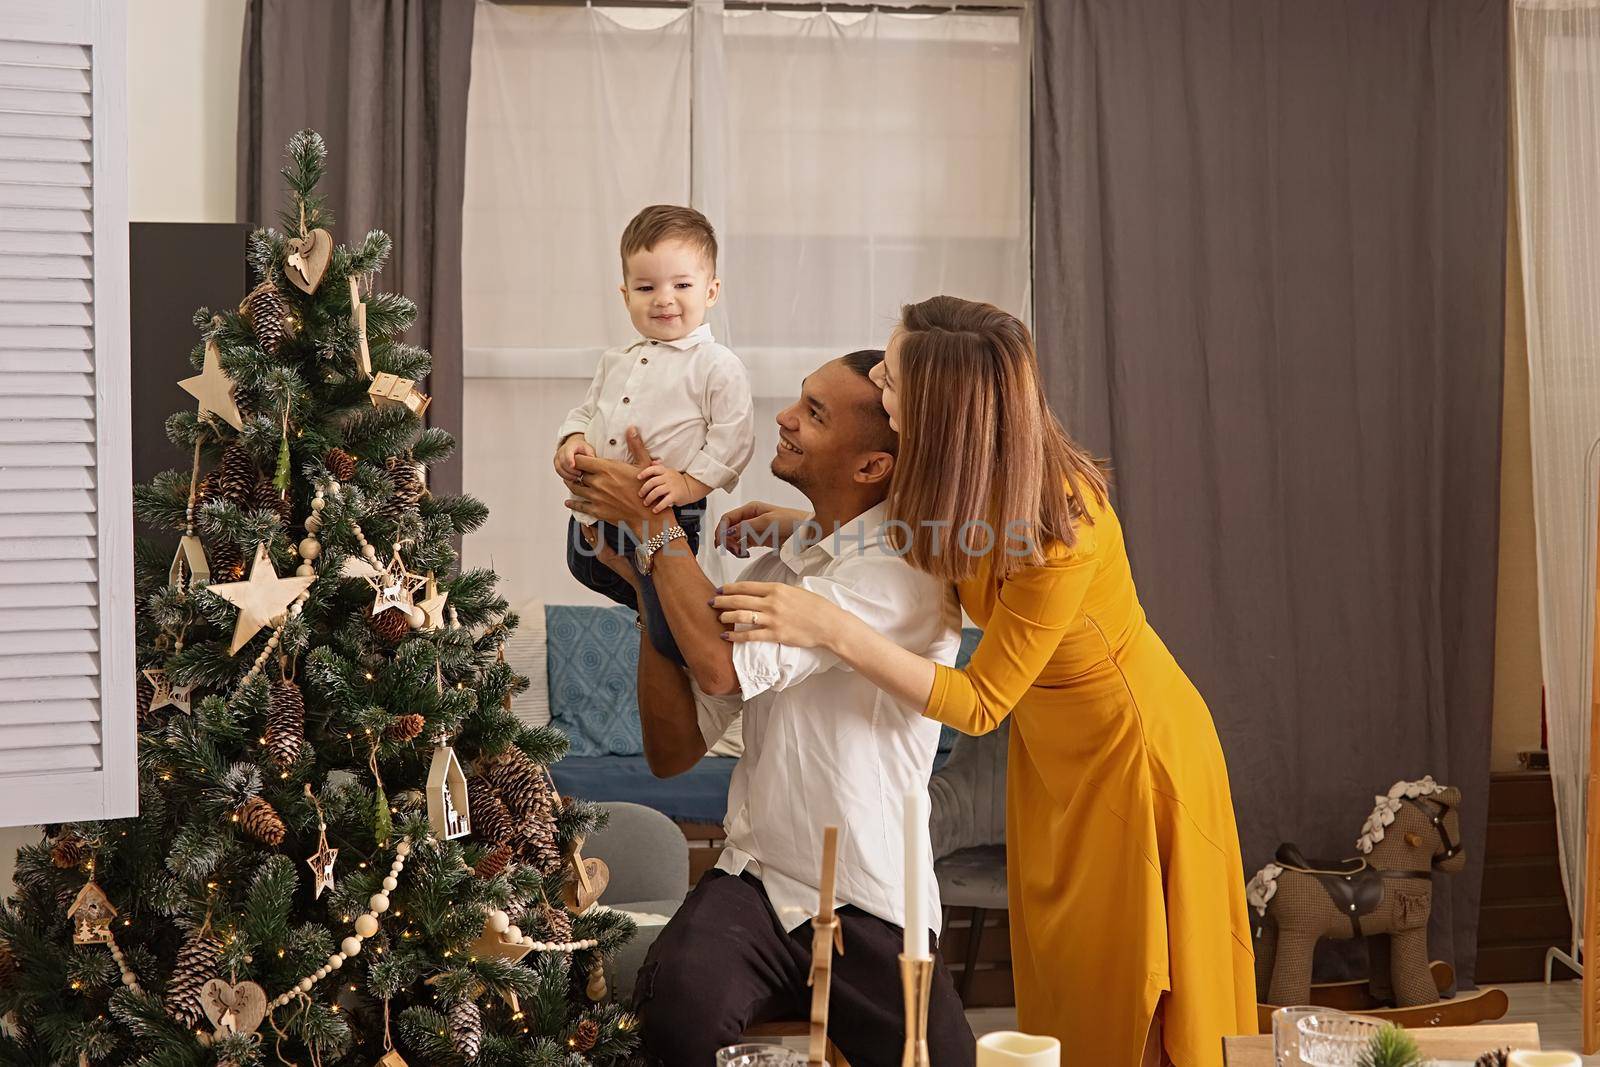 Happy young multiethnic family: dad, son and slender mom in mustard dress, show son a Christmas tree with wooden toys and pine cones, eco-style decor